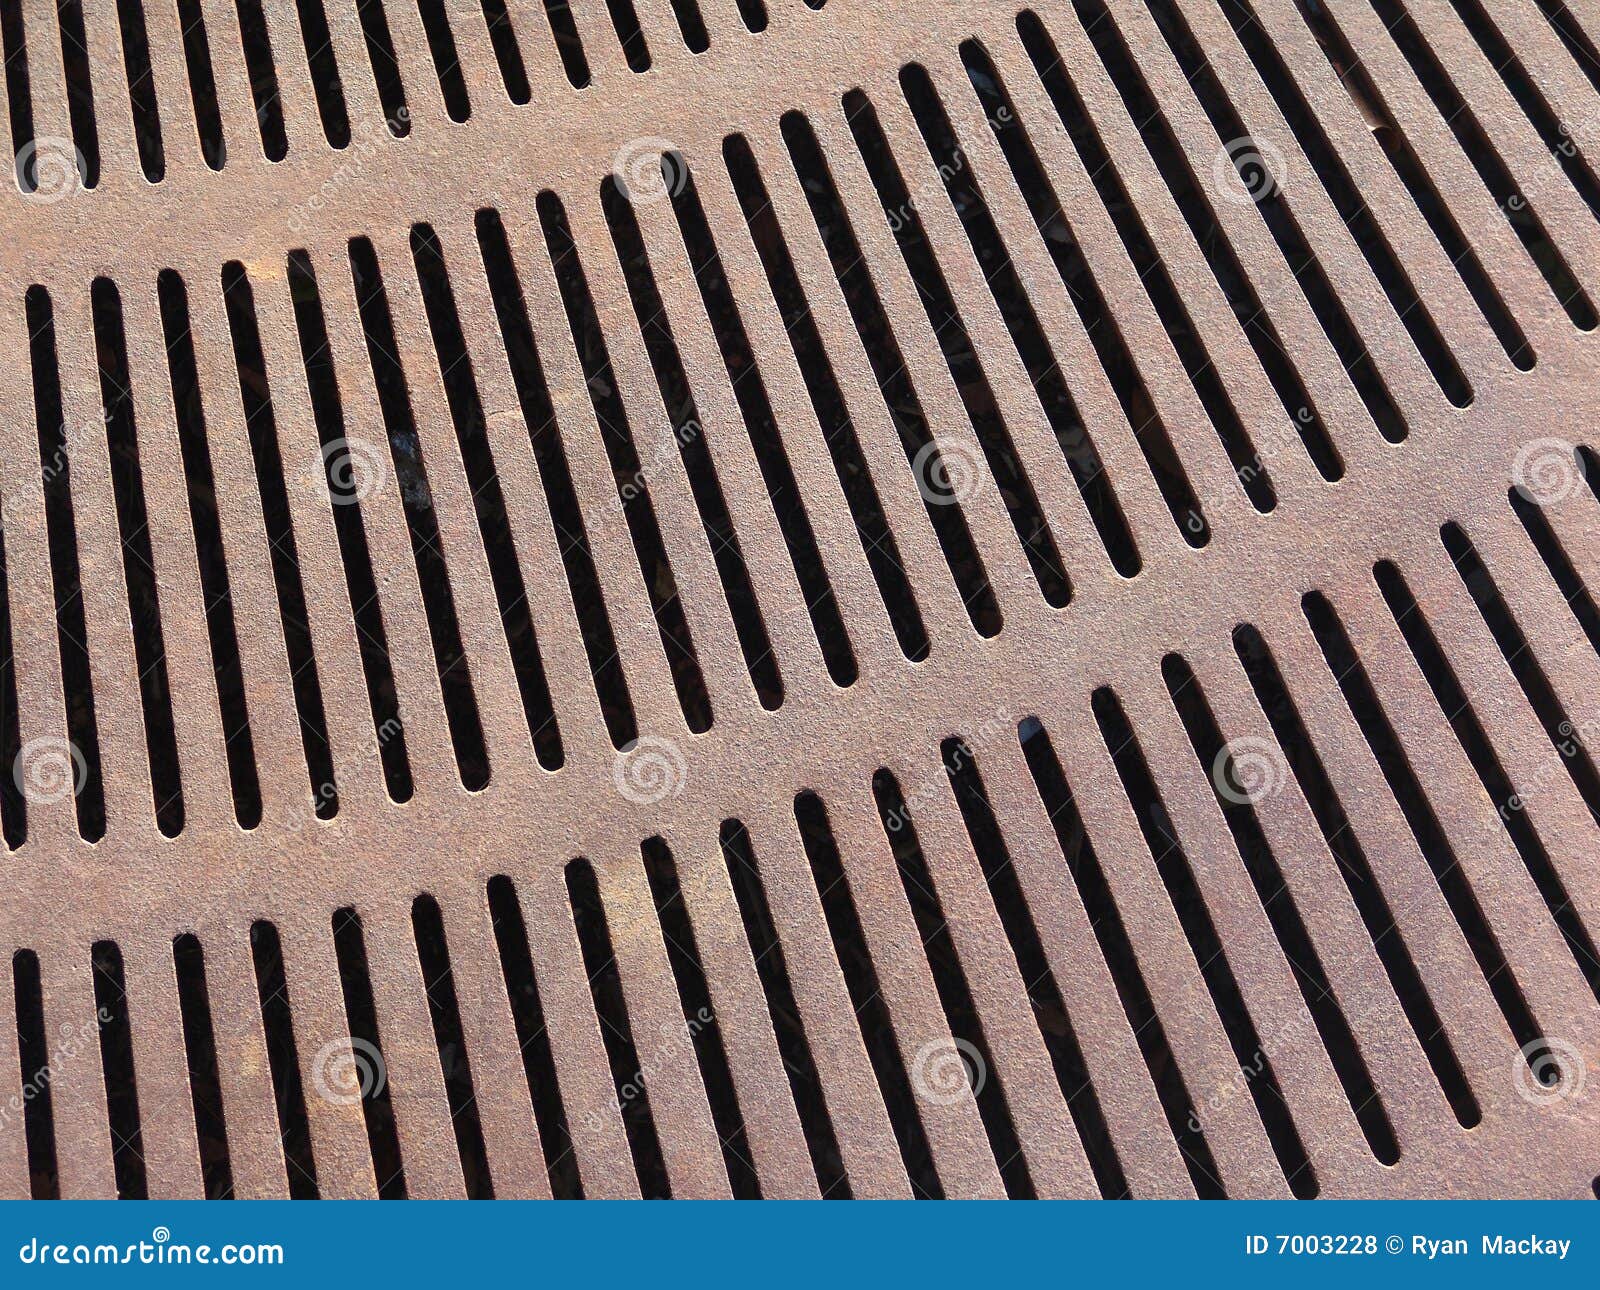 Metal grate stock photo. Image of durable, abstract, grate - 7003228